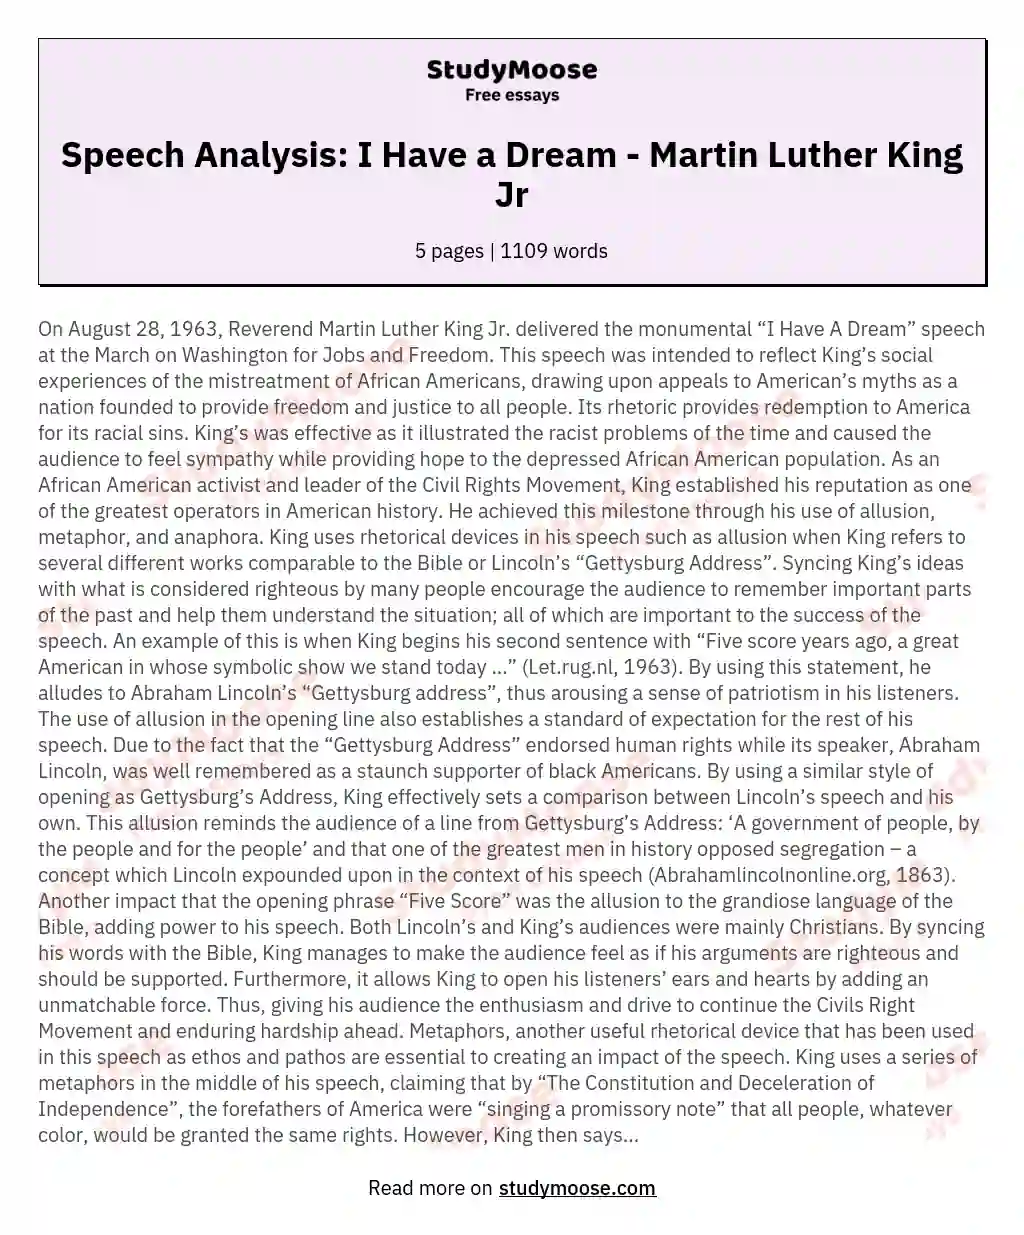 Speech Analysis: I Have a Dream - Martin Luther King Jr essay